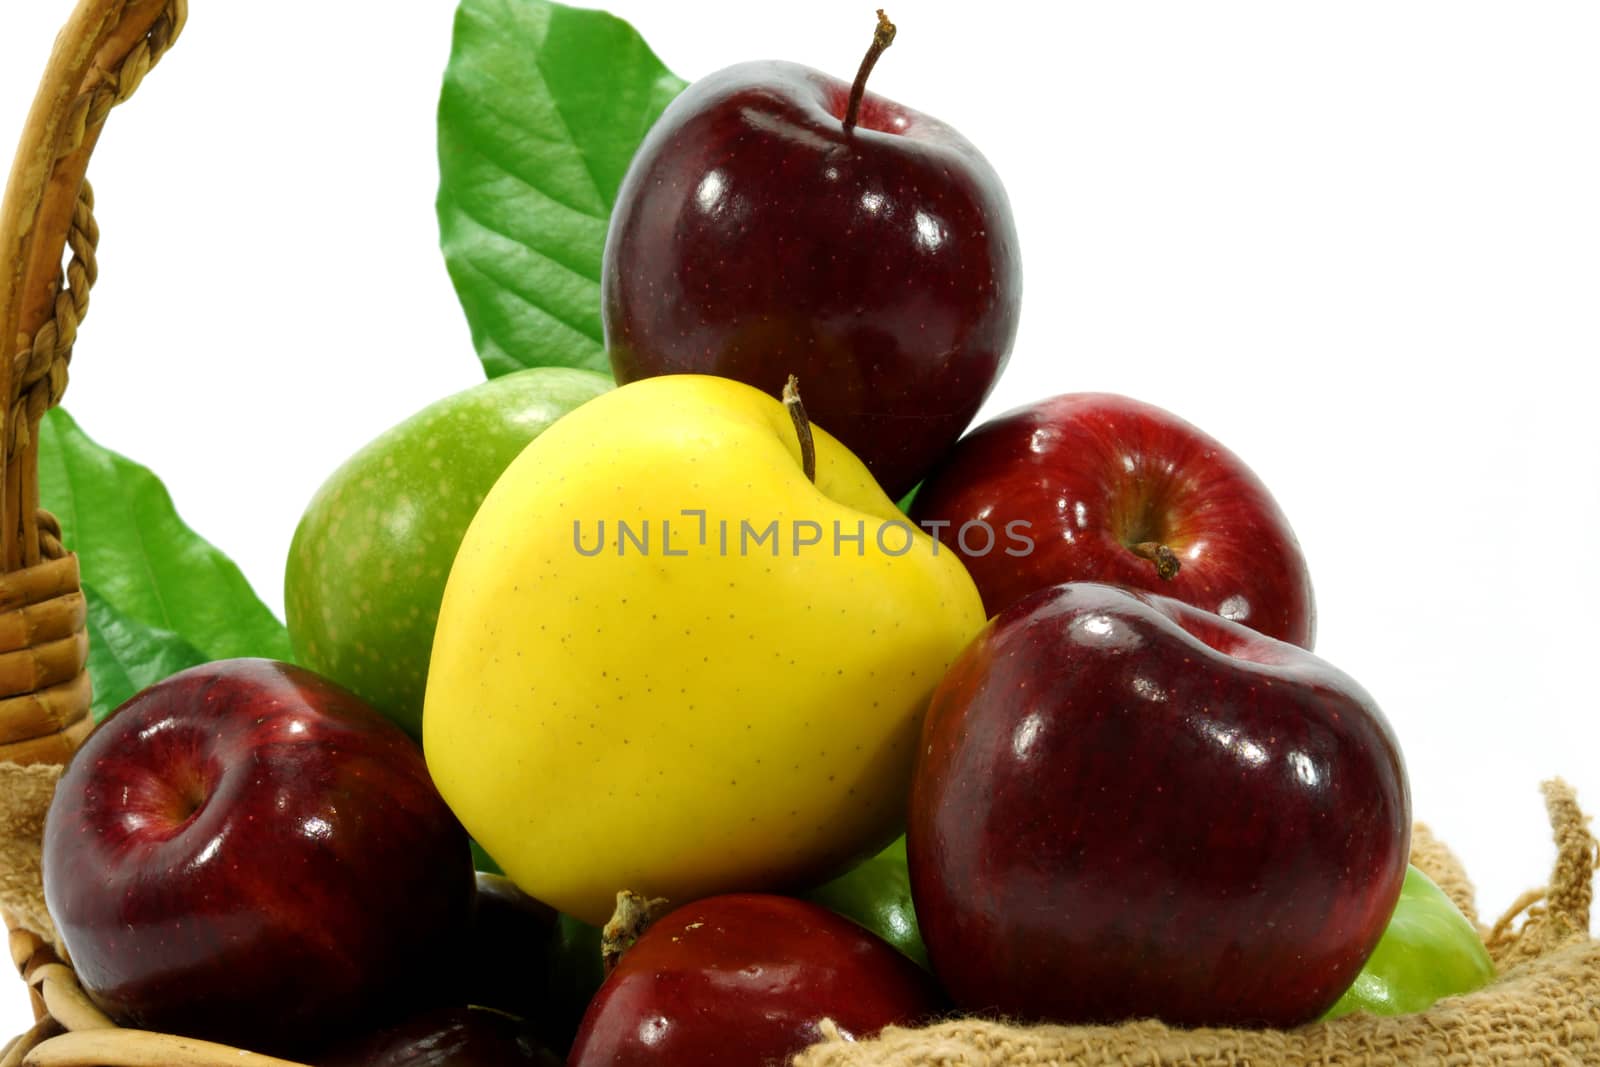 Apples in basket on a white background.